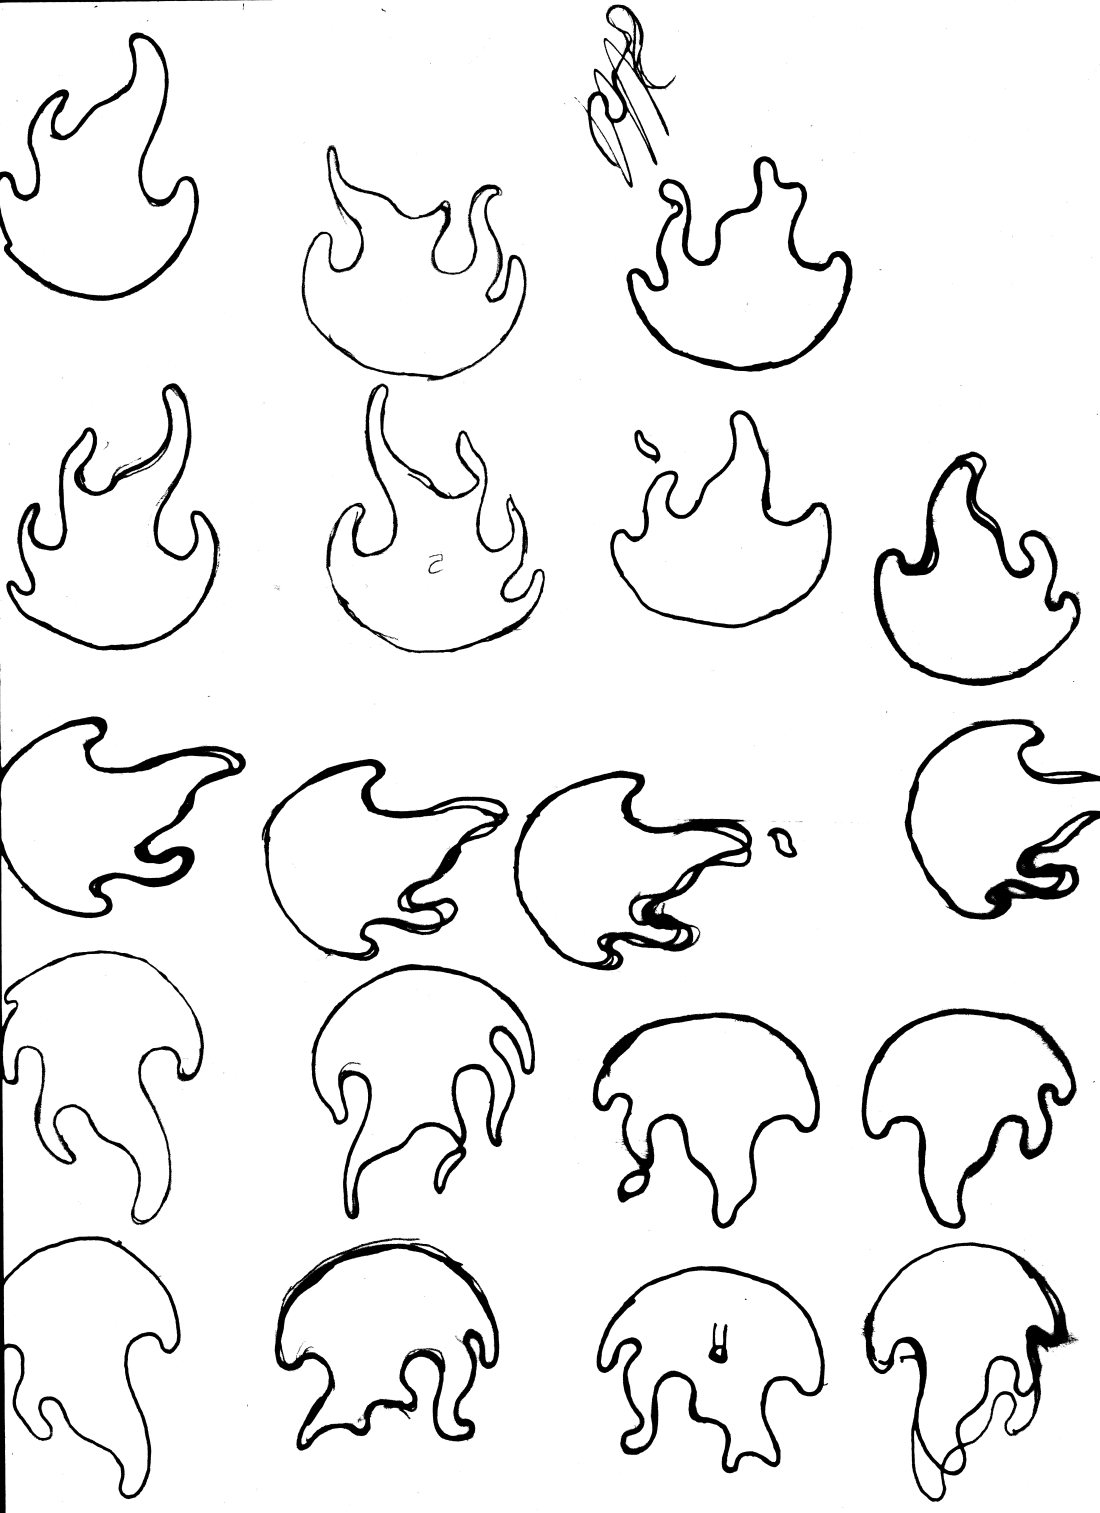 Fire animation tracing paper progression